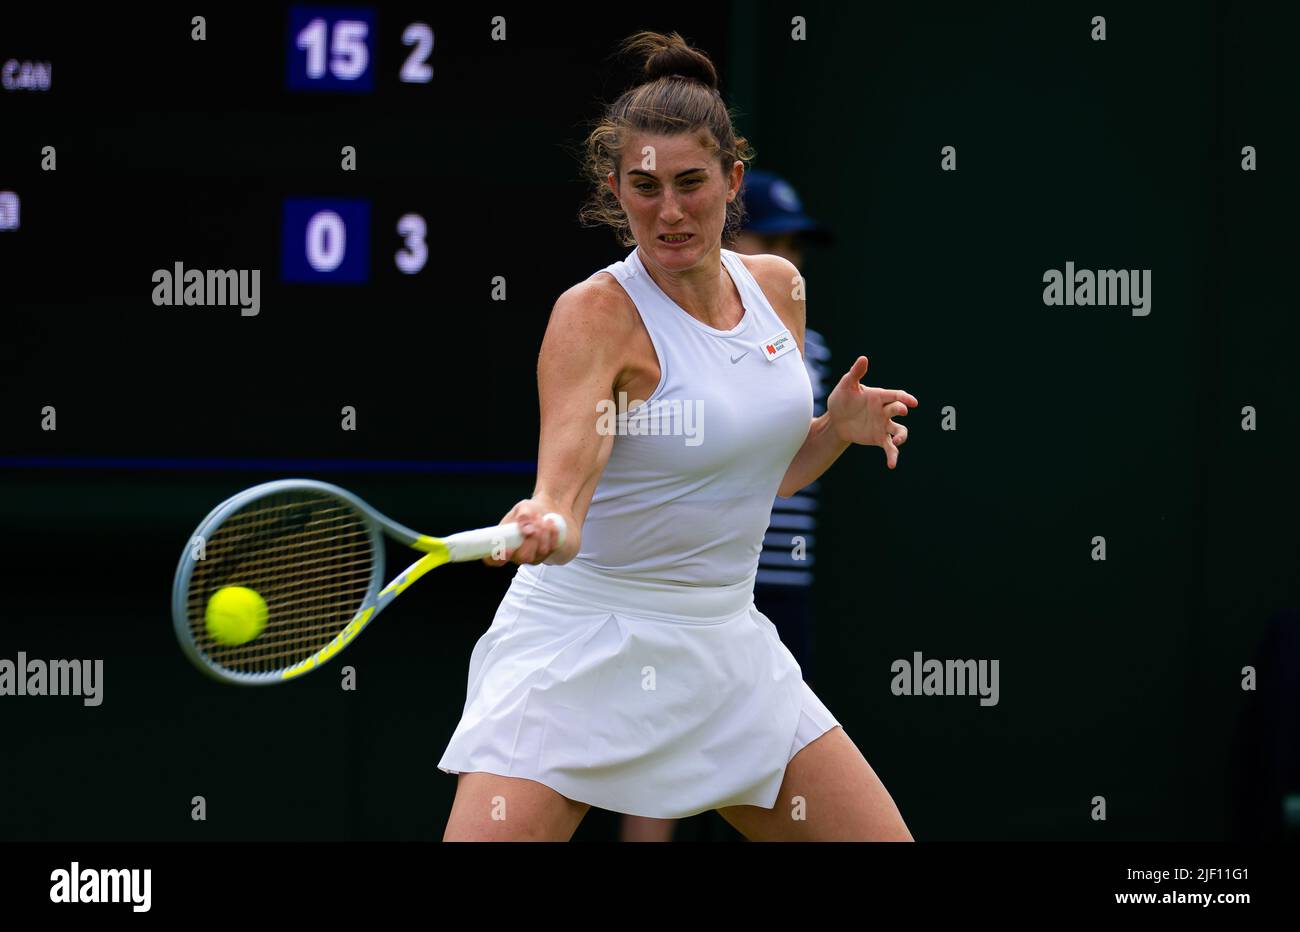 June 27, 2022, Rome, England: Rebecca Marino of Canada in action against  Katarzyna Kawa of Poland during the first round of the 2022 Wimbledon  Championships, Grand Slam tennis tournament on June 27,